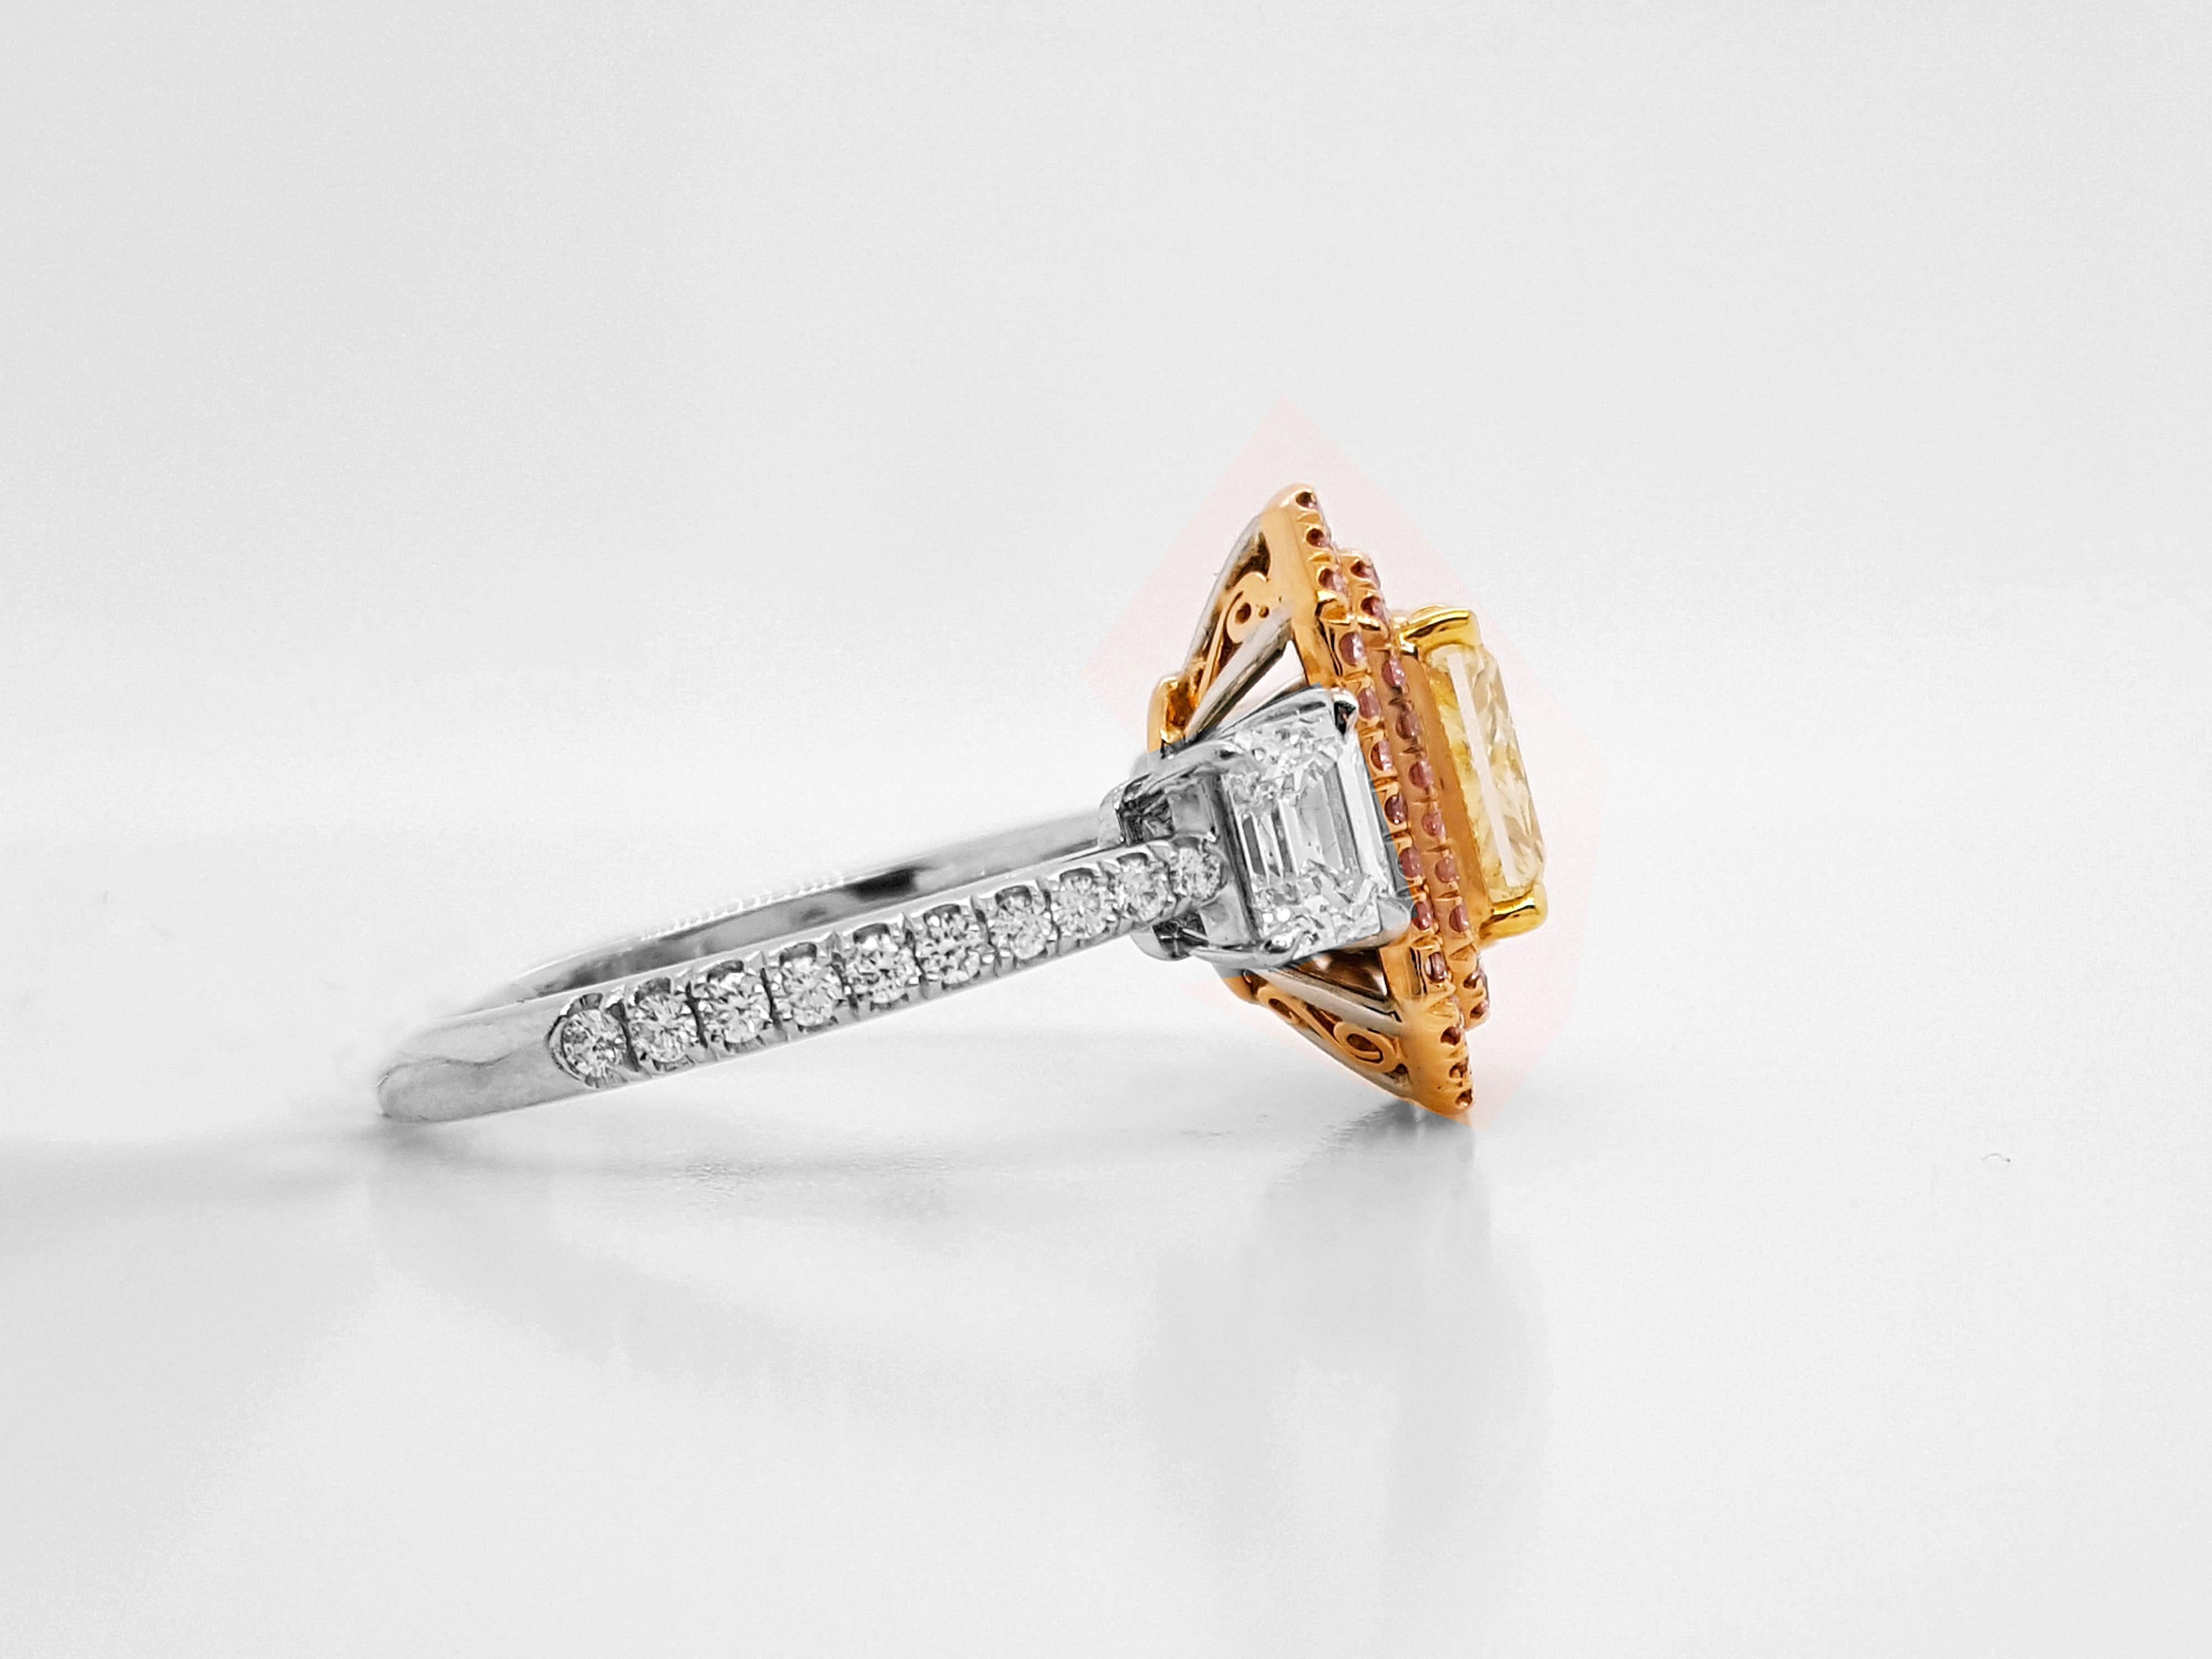 A magnificent Three-Stones Engagement ring, featuring 1.11 carat Fancy Yellow radiant cut diamond, GIA certified as VS1 clarity. set in double halo ring flanked by two emerald cut diamonds weighing approximately 0.69 carat. This classic design